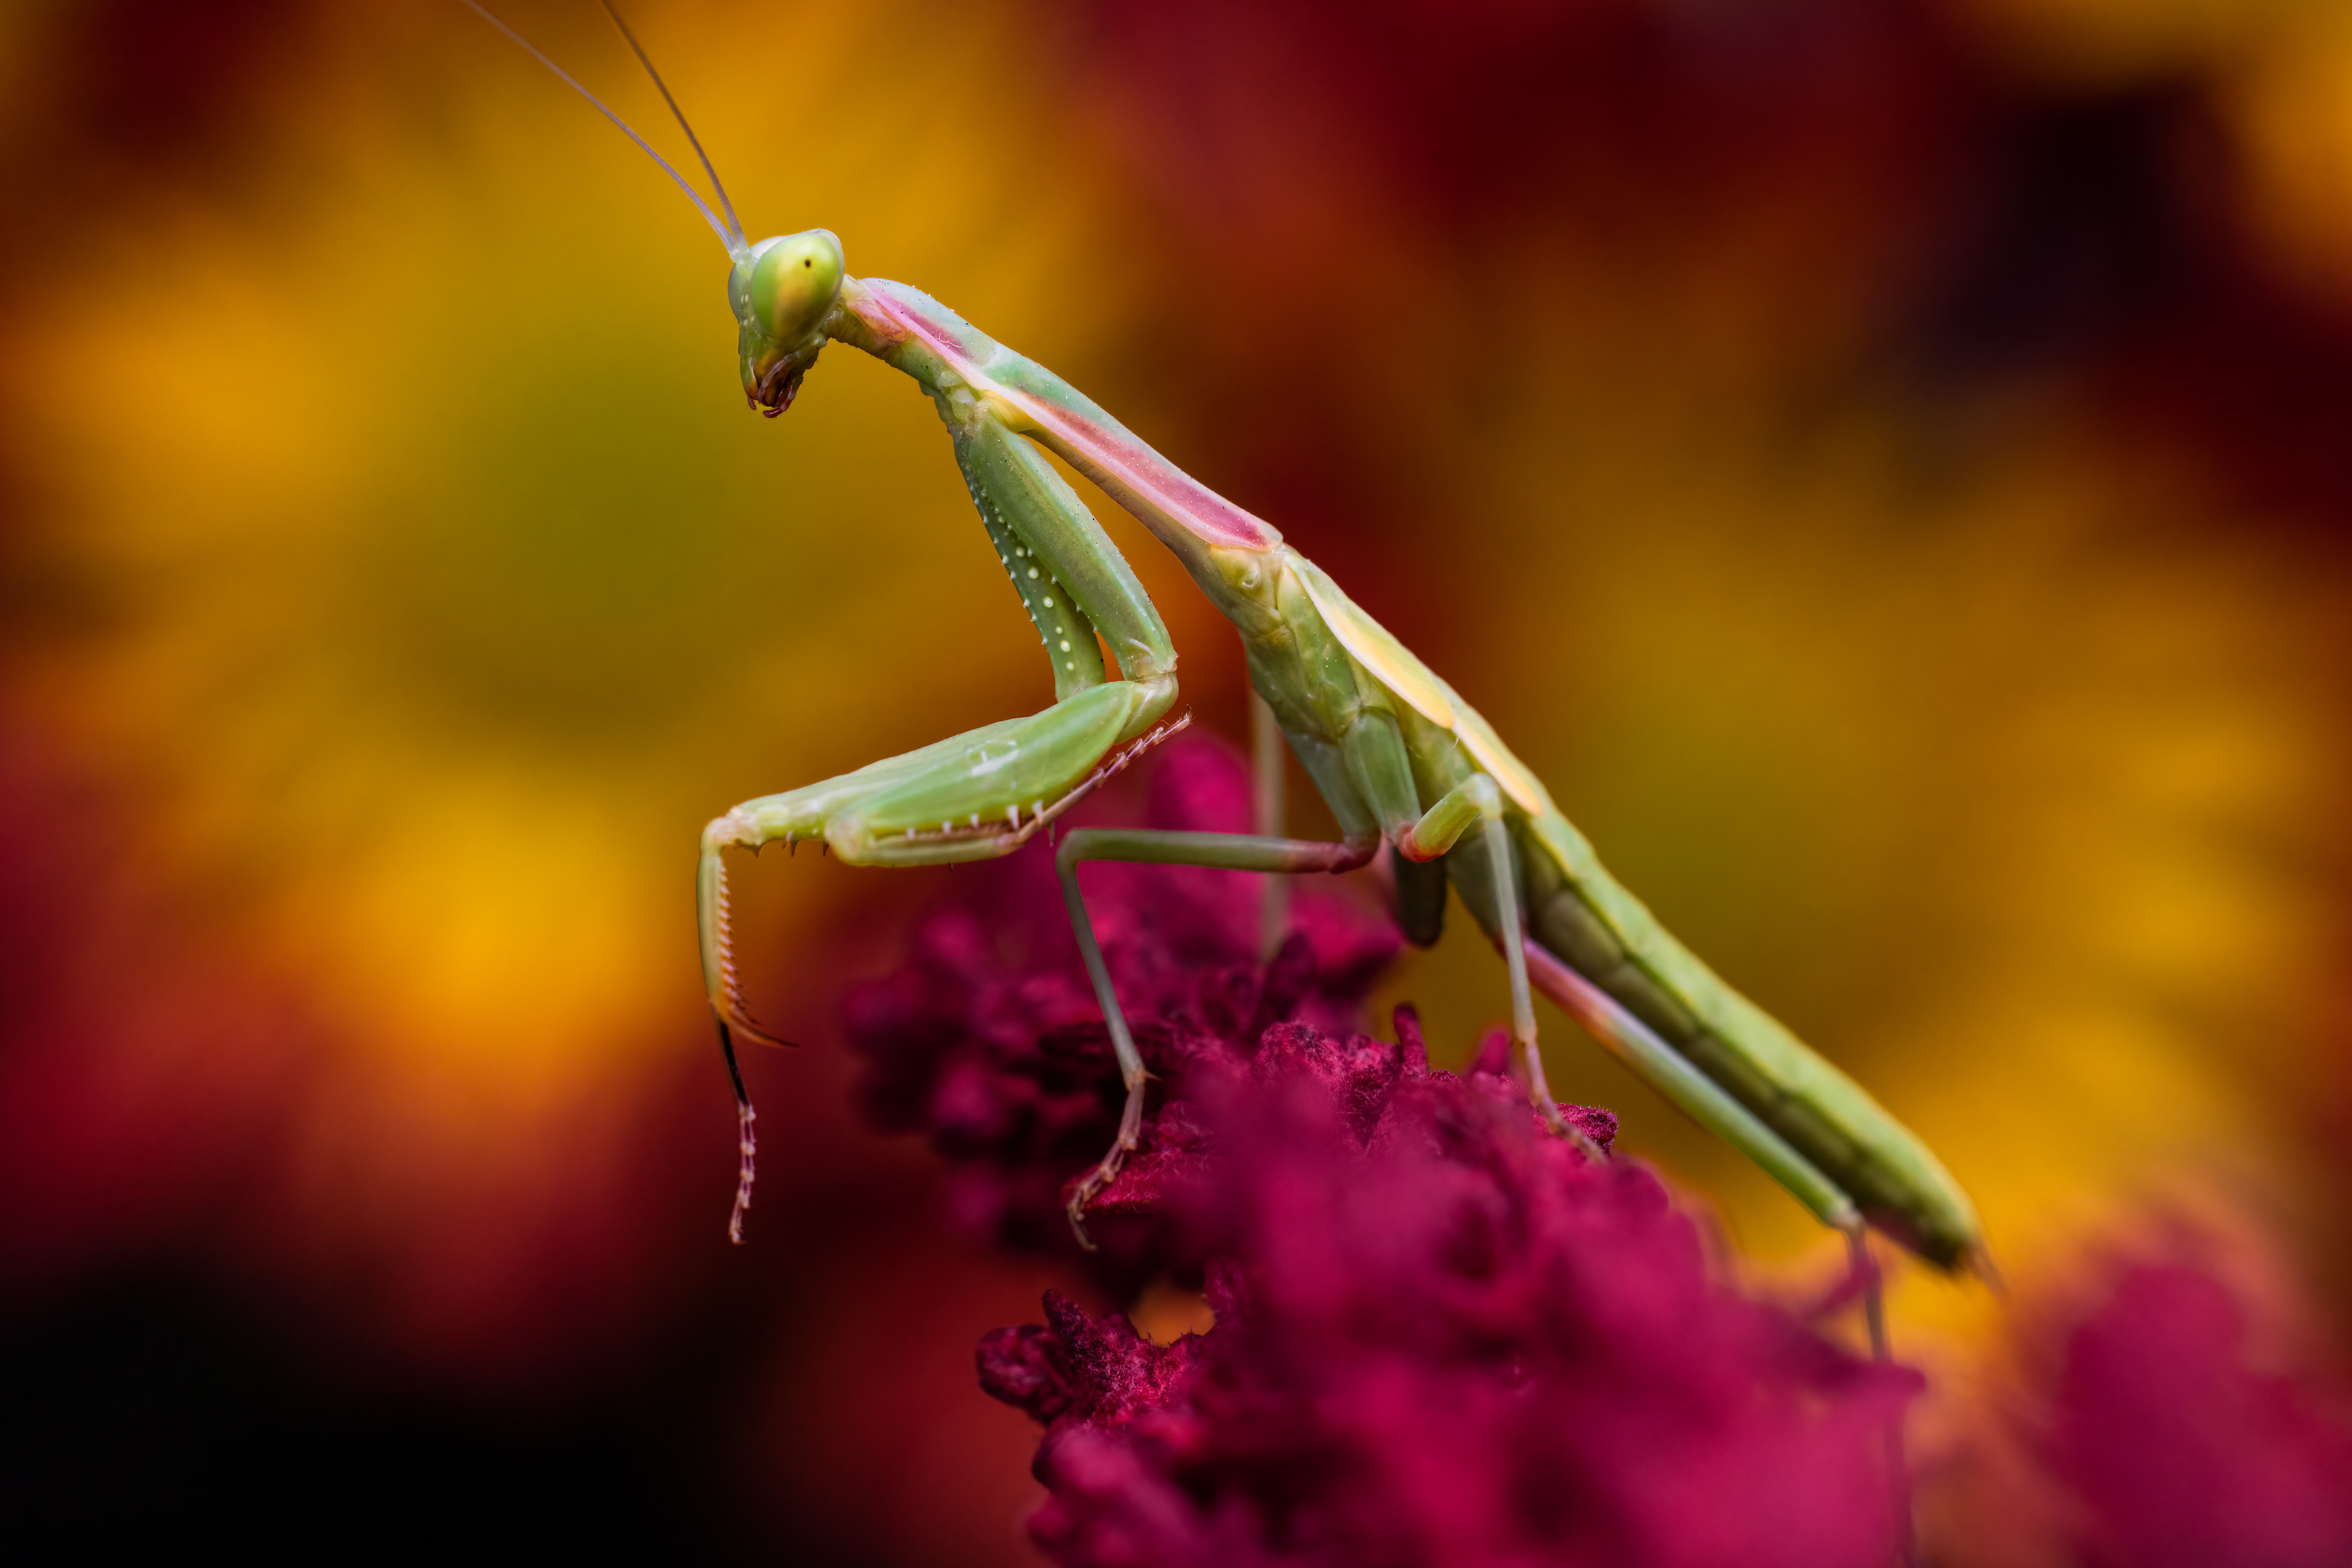 Photo by Jonathan Cline  |  A small green mantis with some nice coloring perched on a small plant with some flowers off in the background.  These insects are always fun to find and really seem to have a personality to them